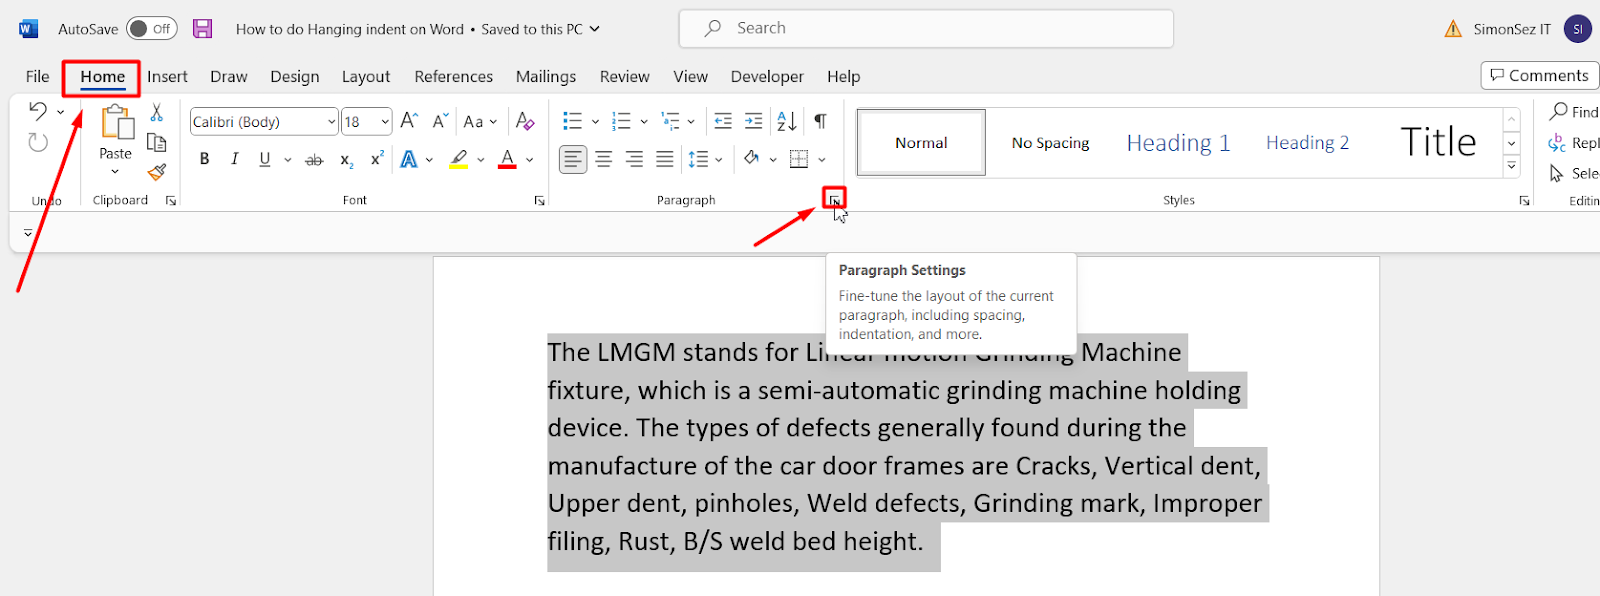 How to do hanging indent on Word- Paragraph Settings under Home Tab.